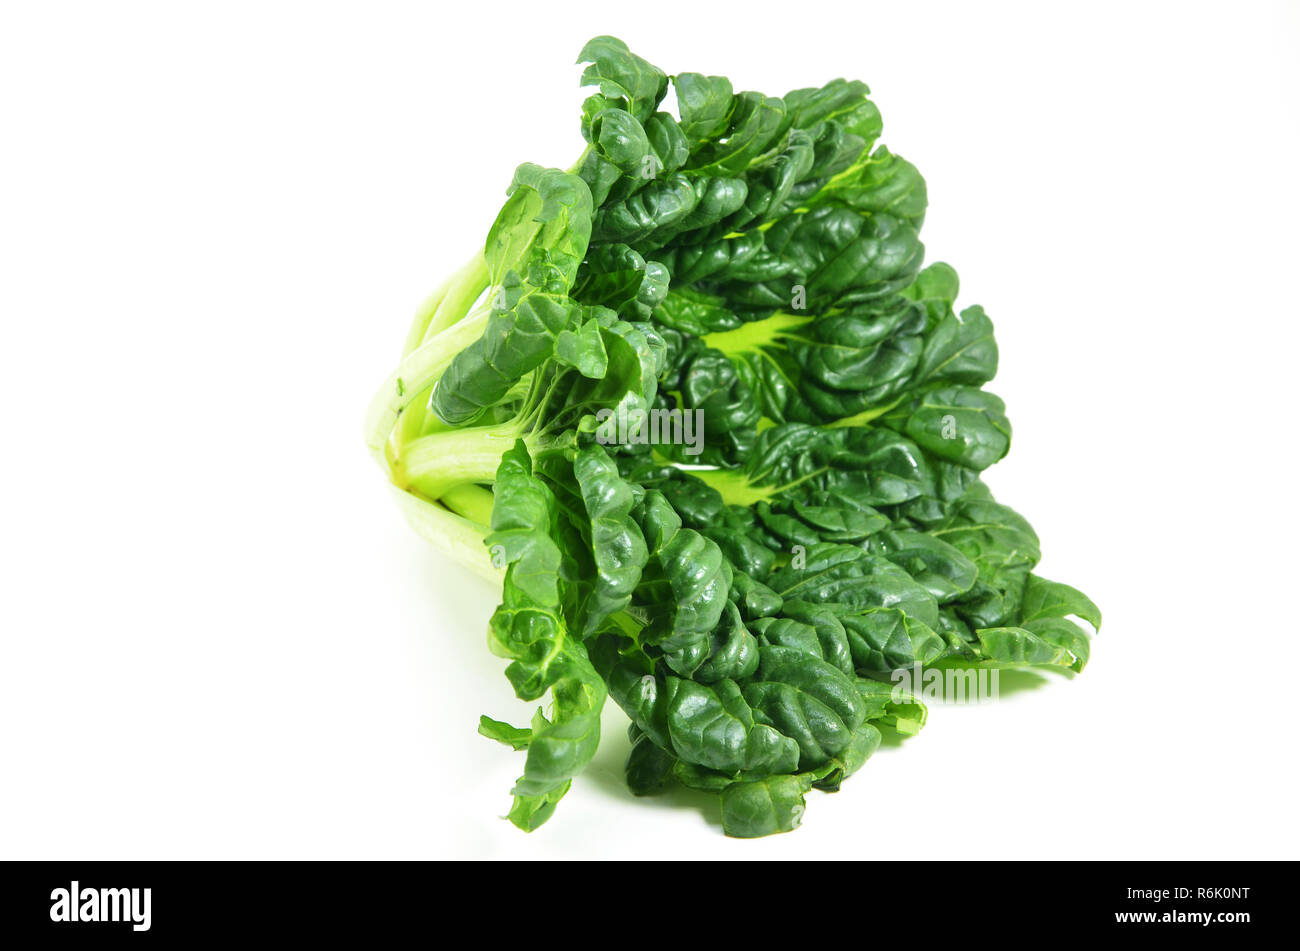 Chinese flat cabbage (Brassica chinensis) or Tah Tsai lettuce Stock Photo